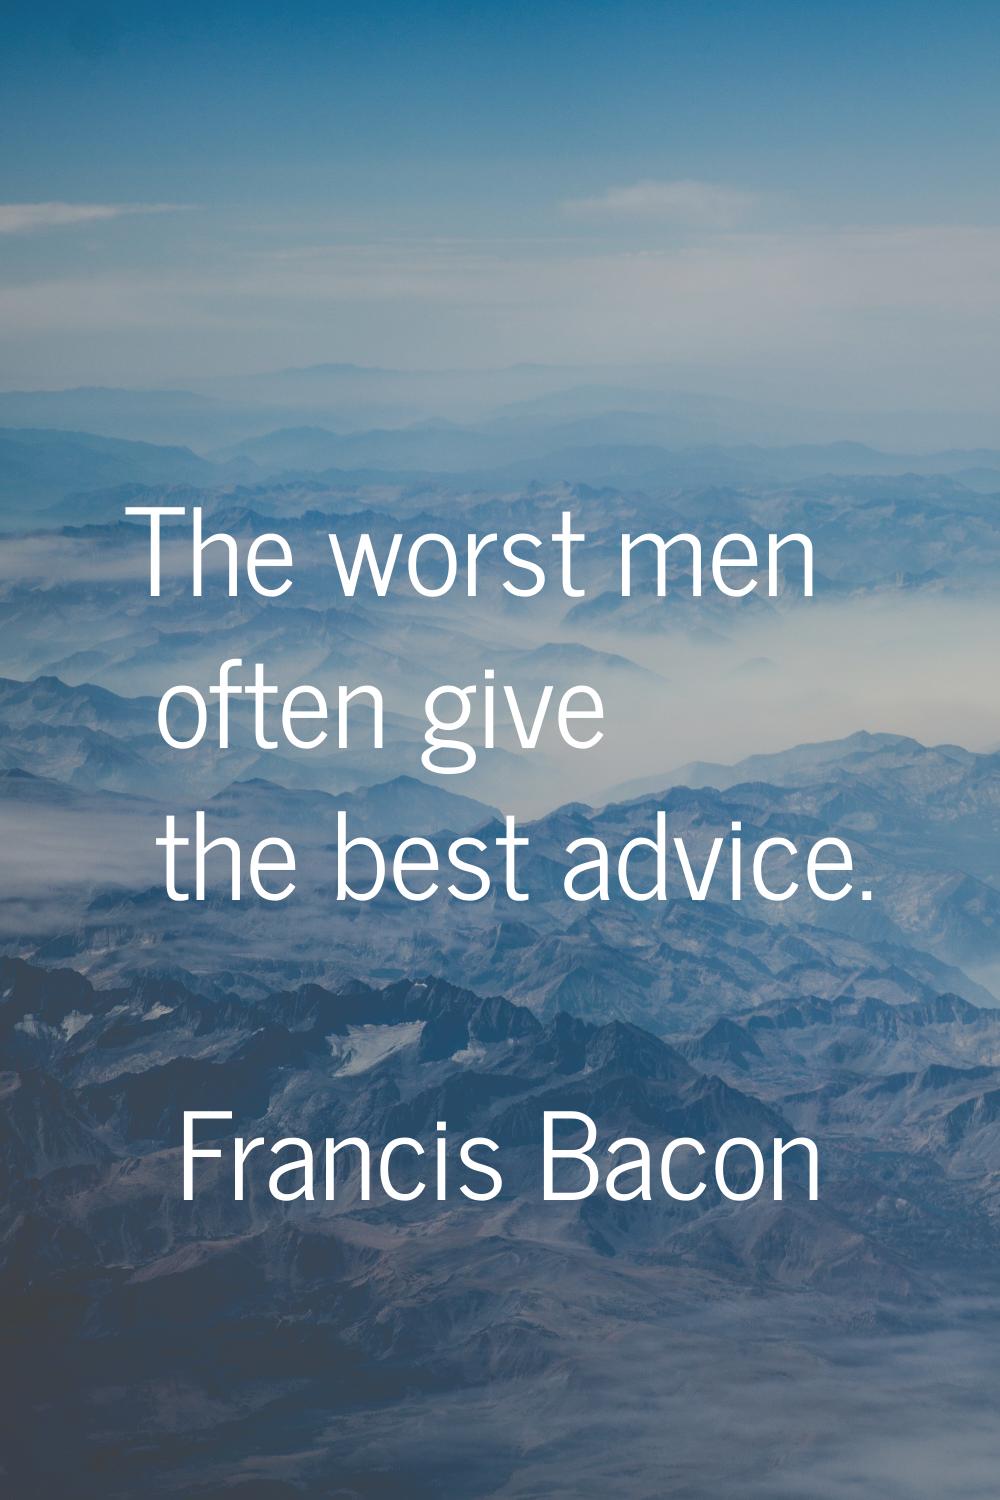 The worst men often give the best advice.